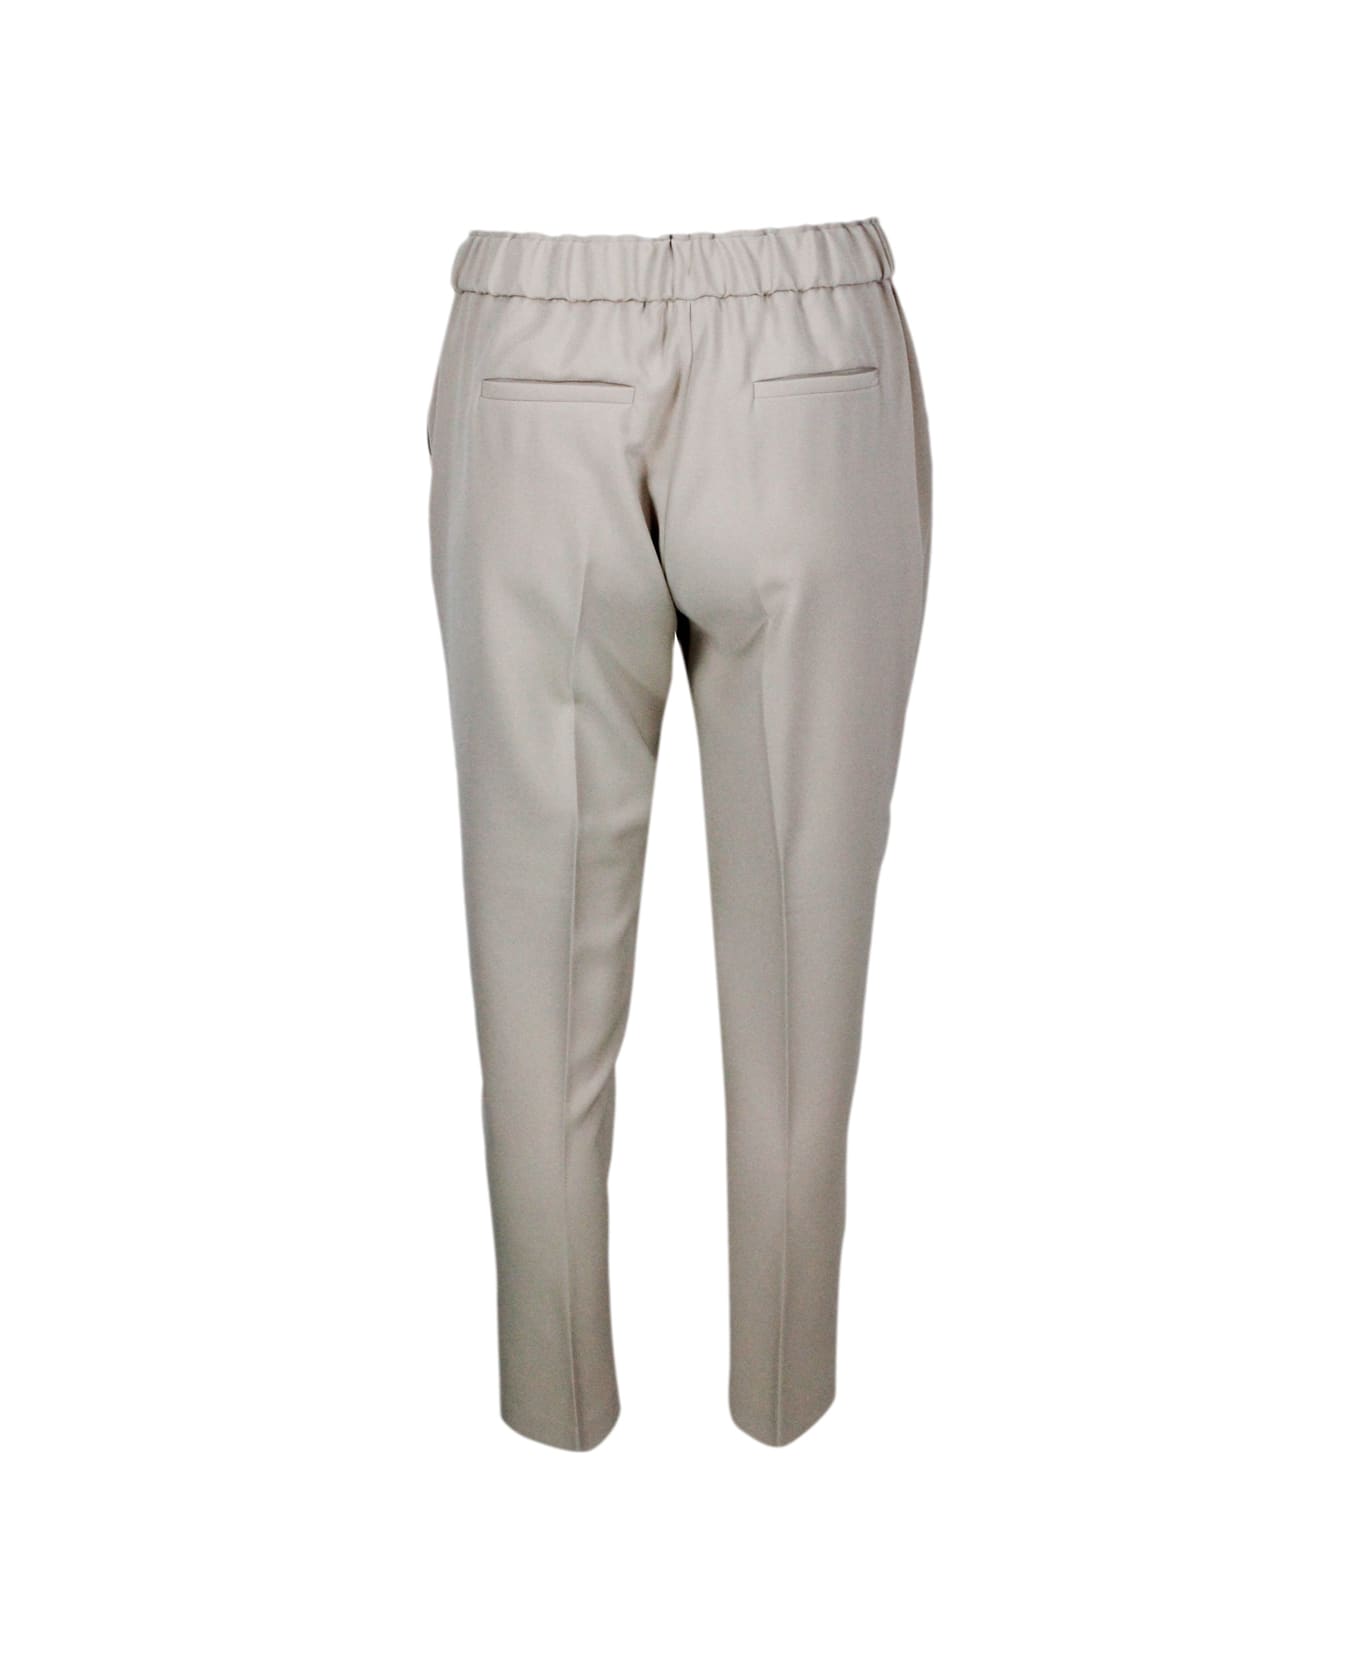 Antonelli Jogging Trousers With Elastic Waist And Welt Pockets With A Cigarette Fit - Beige ボトムス